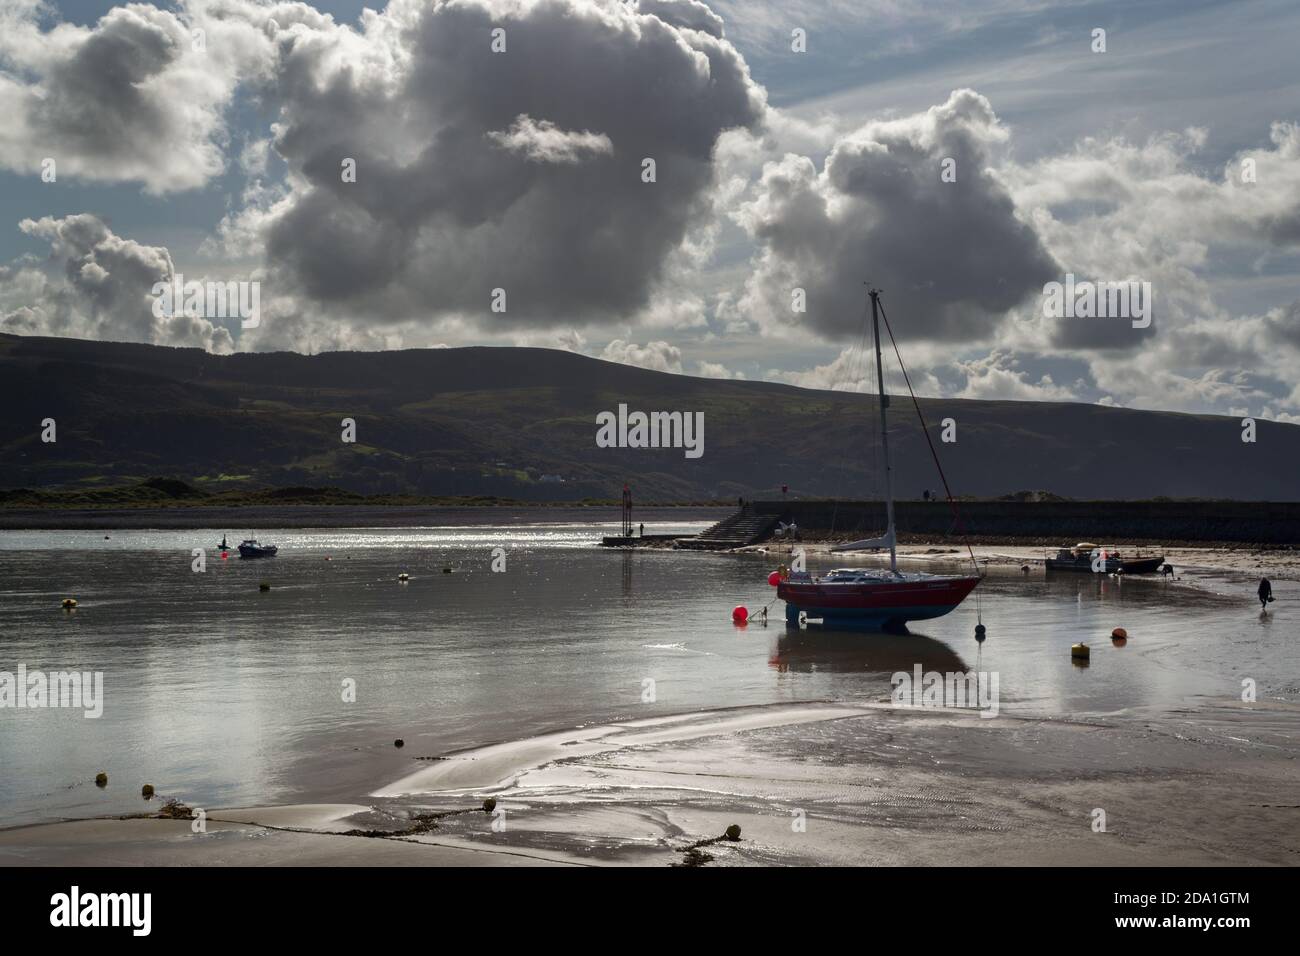 BARMOUTH, WALES - october 1st, 2020: boats in the Estuary of the river Mawddach, Barmouth, Wales, County of Gwynedd on a sunny autumn afternoon Stock Photo